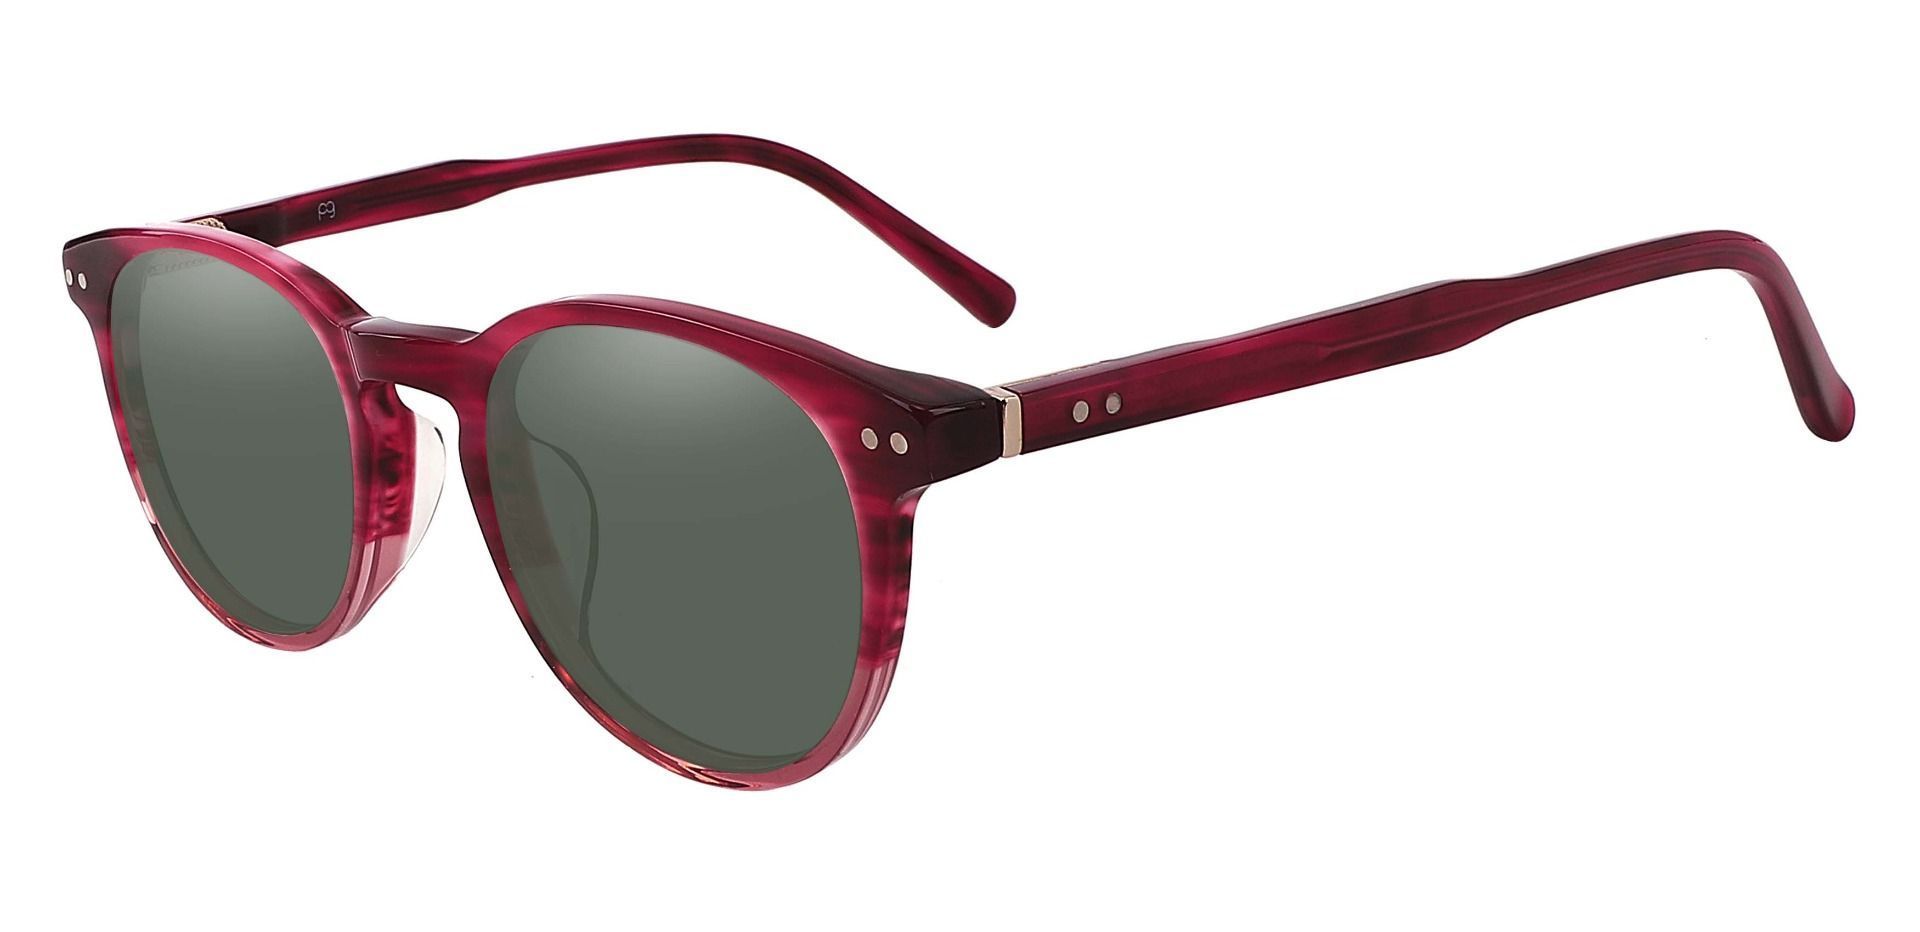 Marianna Oval Progressive Sunglasses - Red Frame With Green Lenses